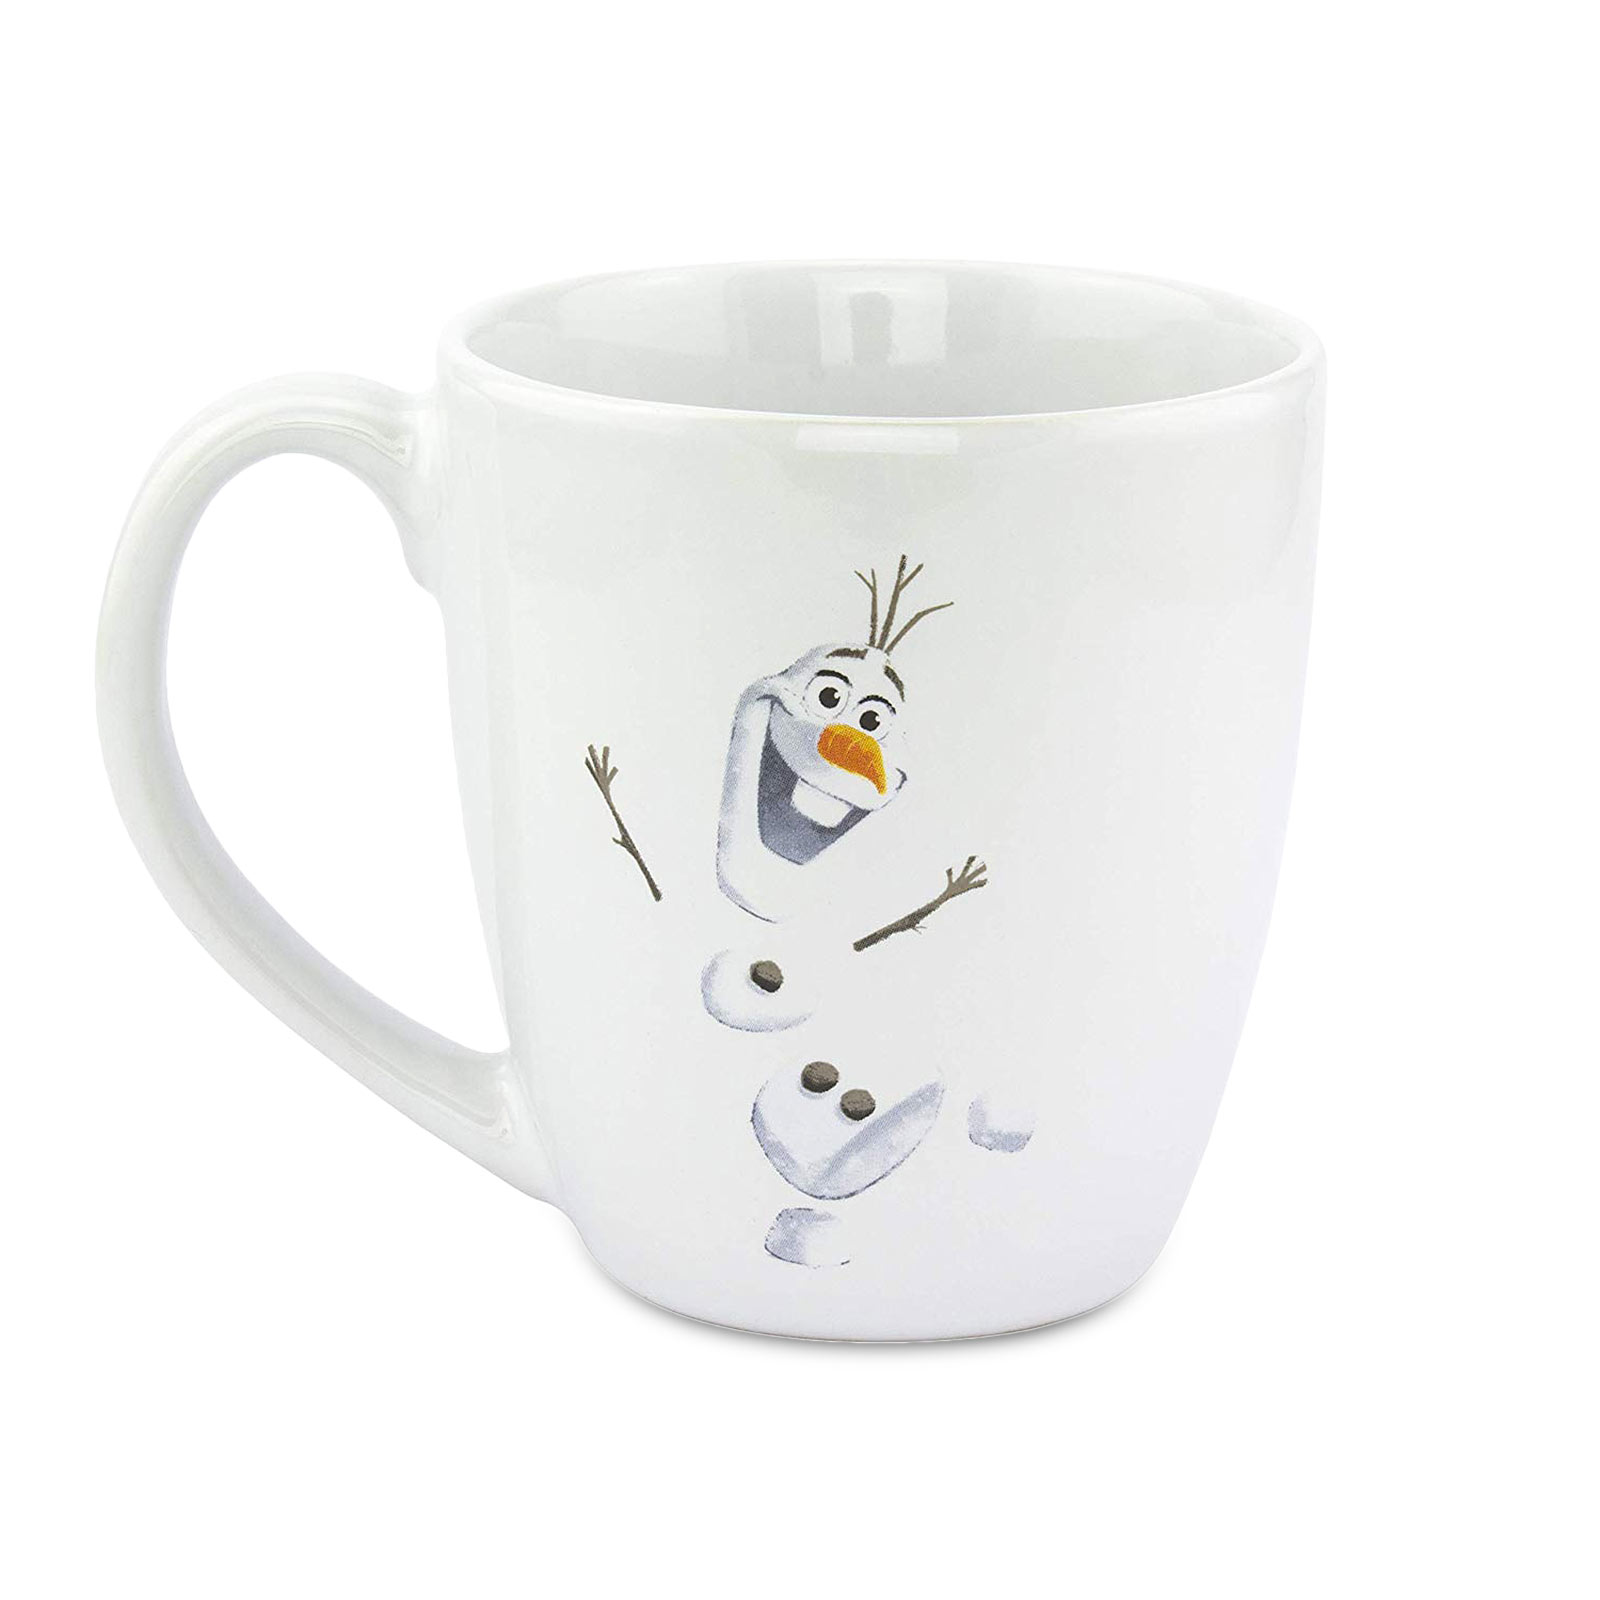 Frozen - Olaf cup with cup warmer